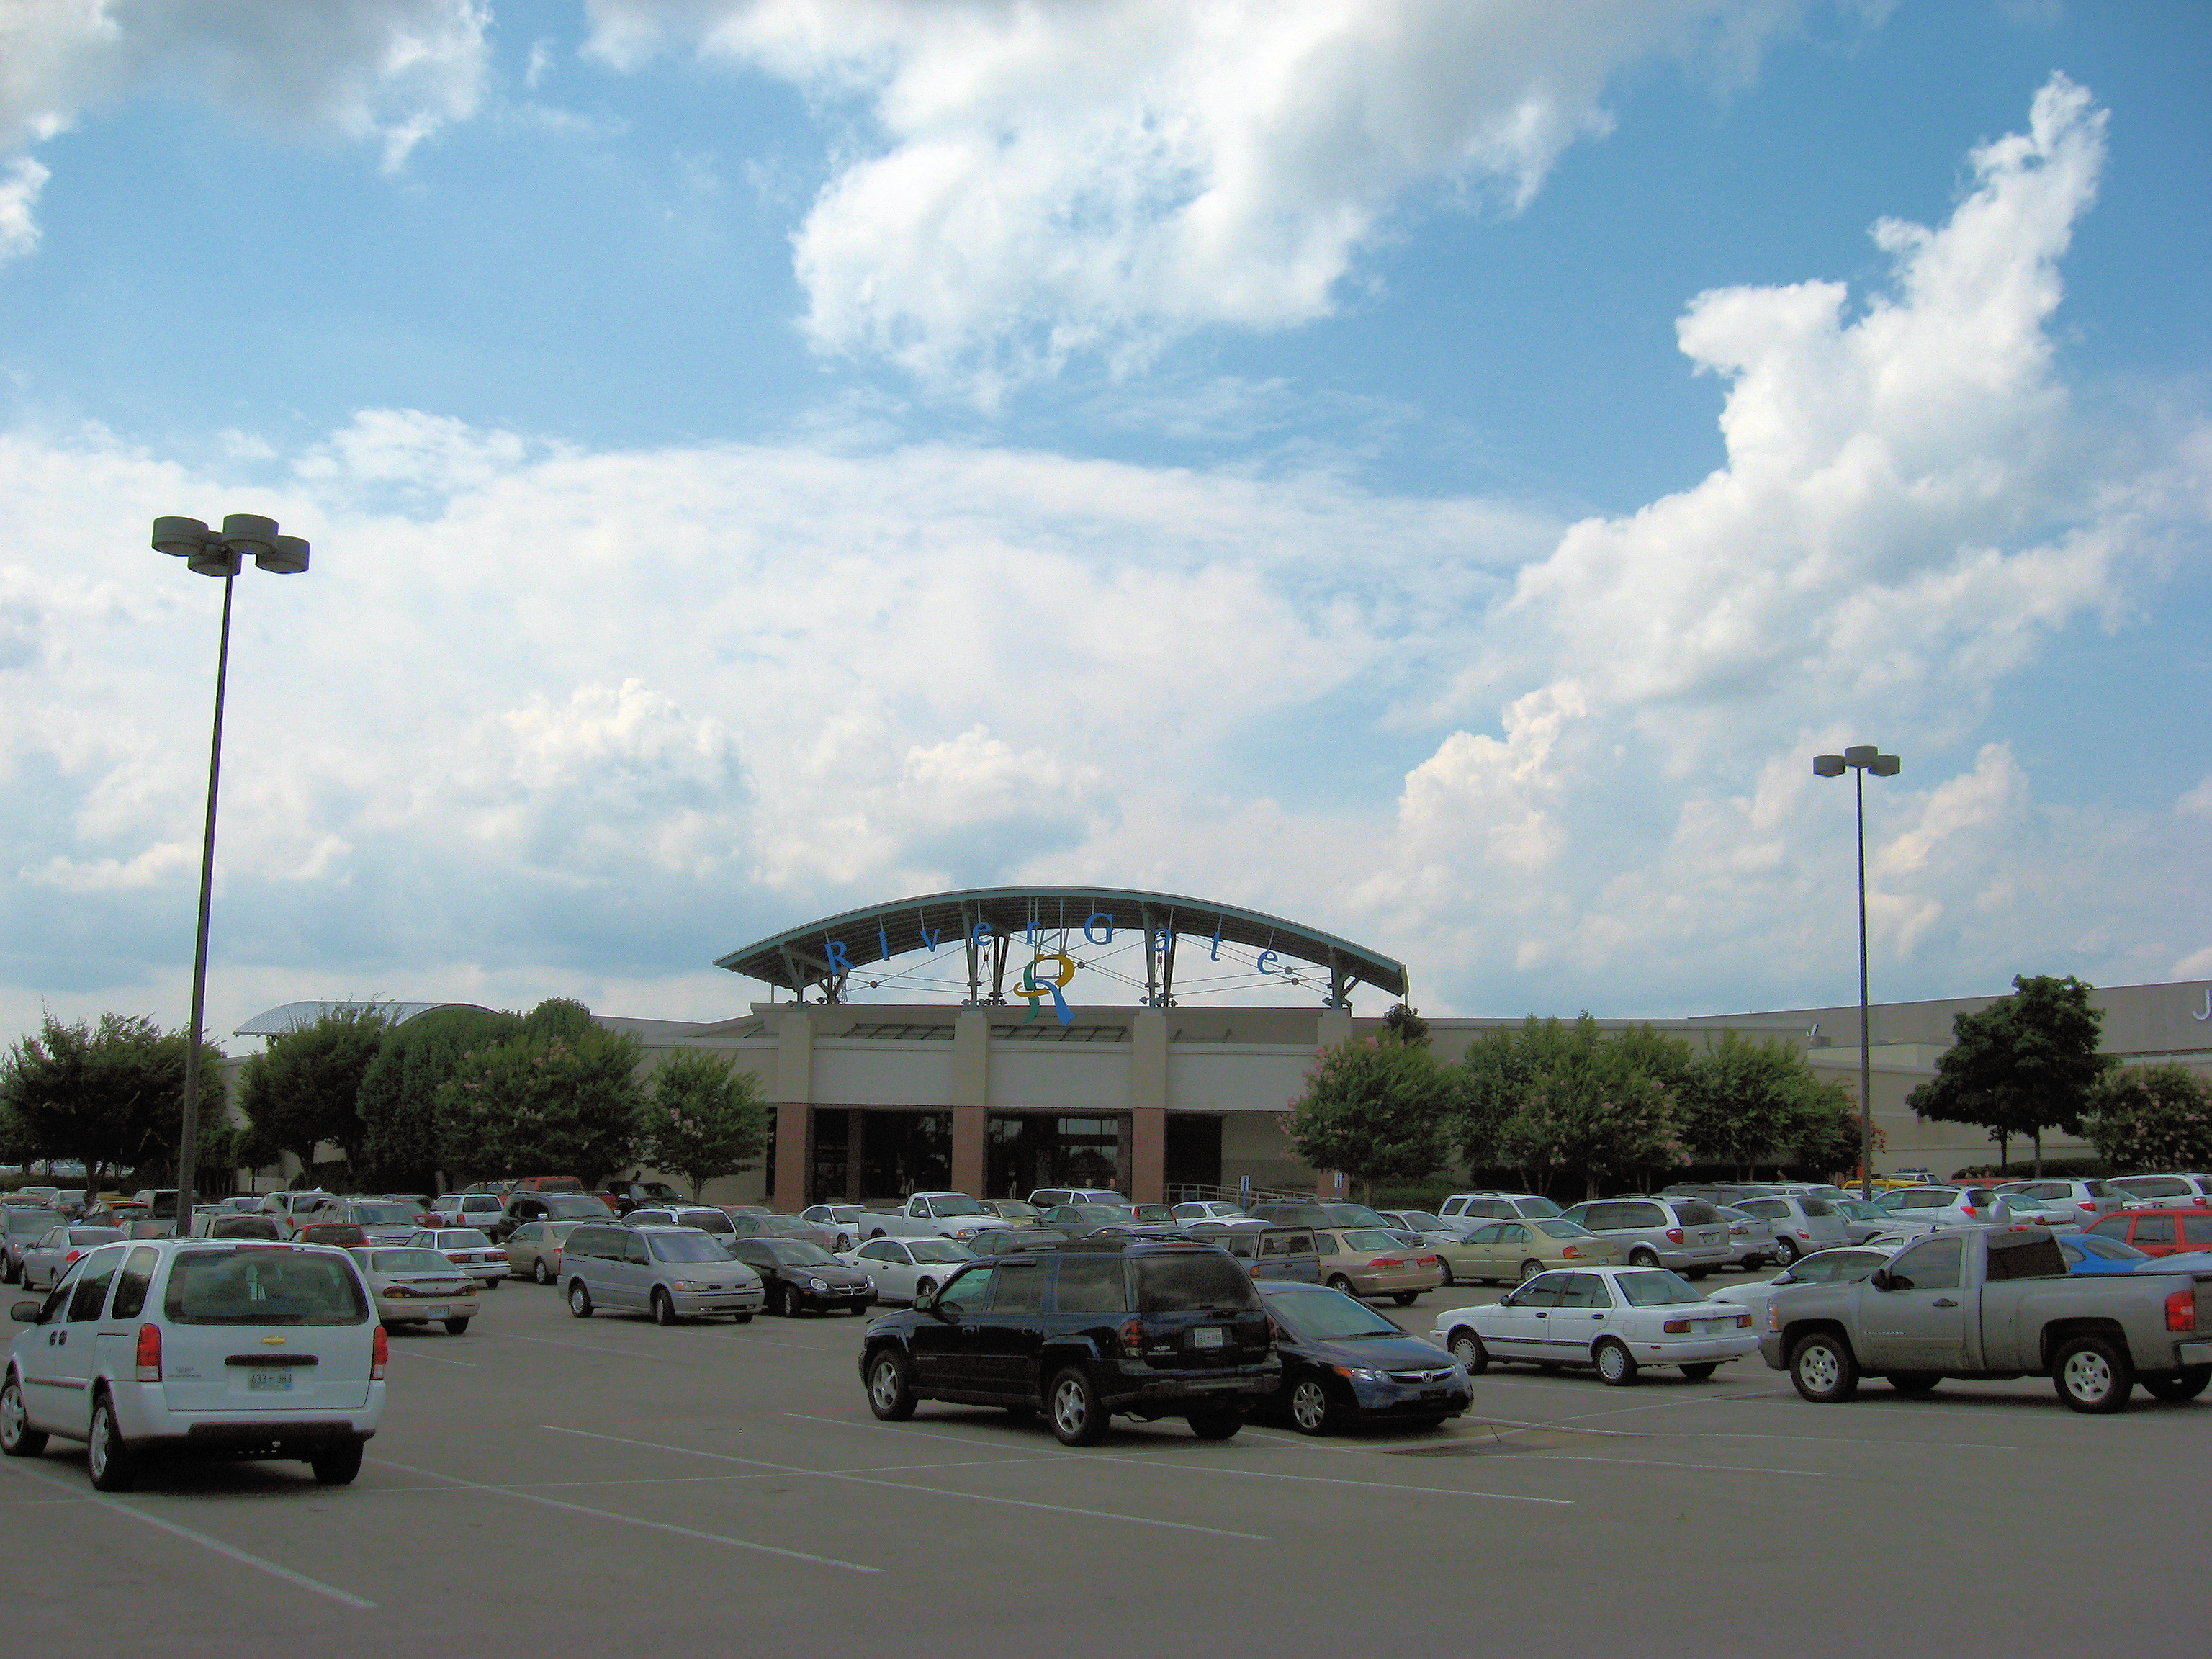 Goodlettsville TN: RIVERGATE MALL - Retail Space For Lease